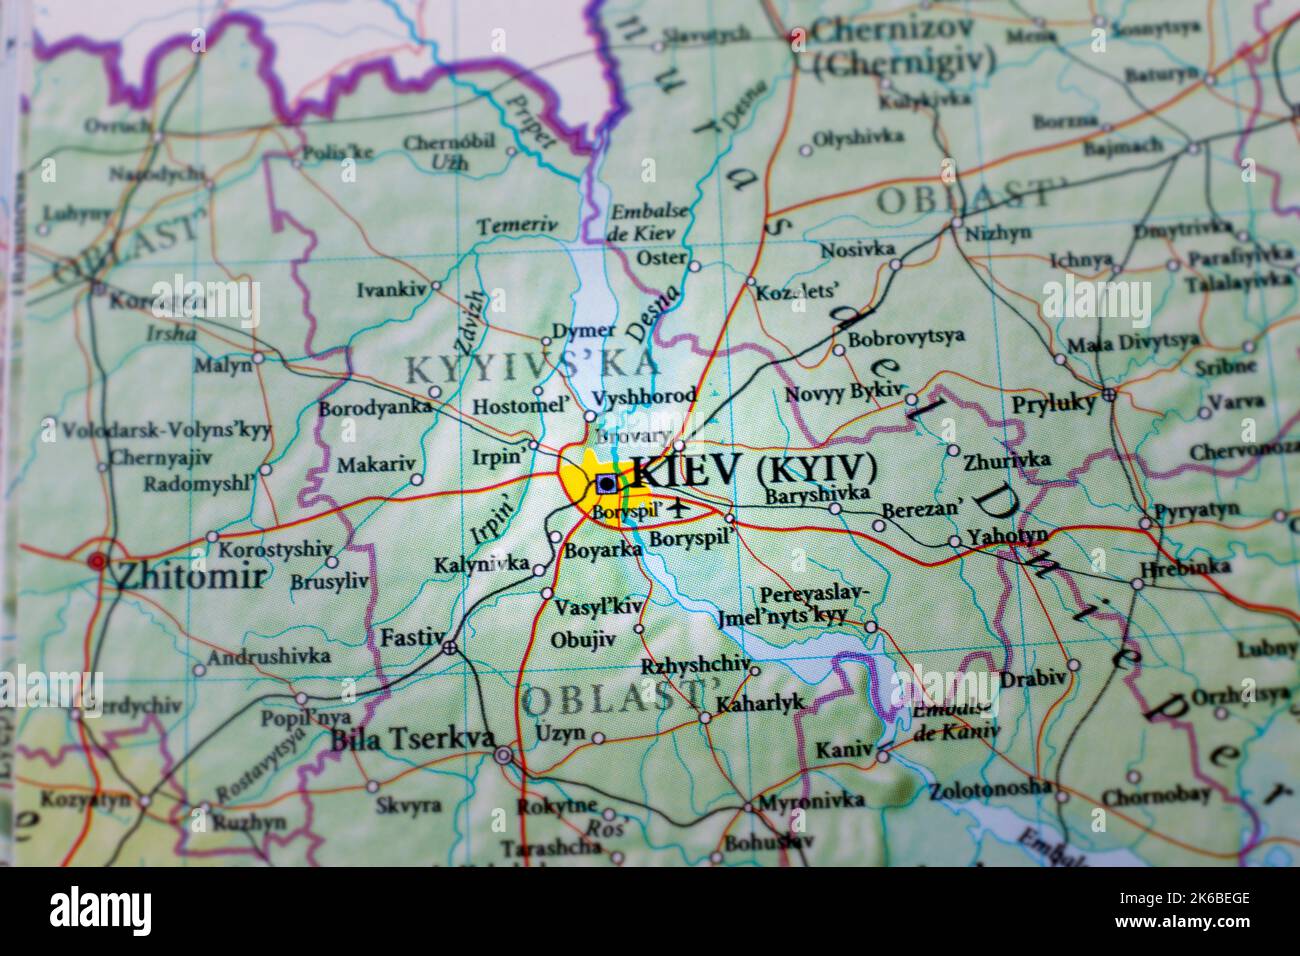 Kiev marked on the map. Travel concept. Stock Photo